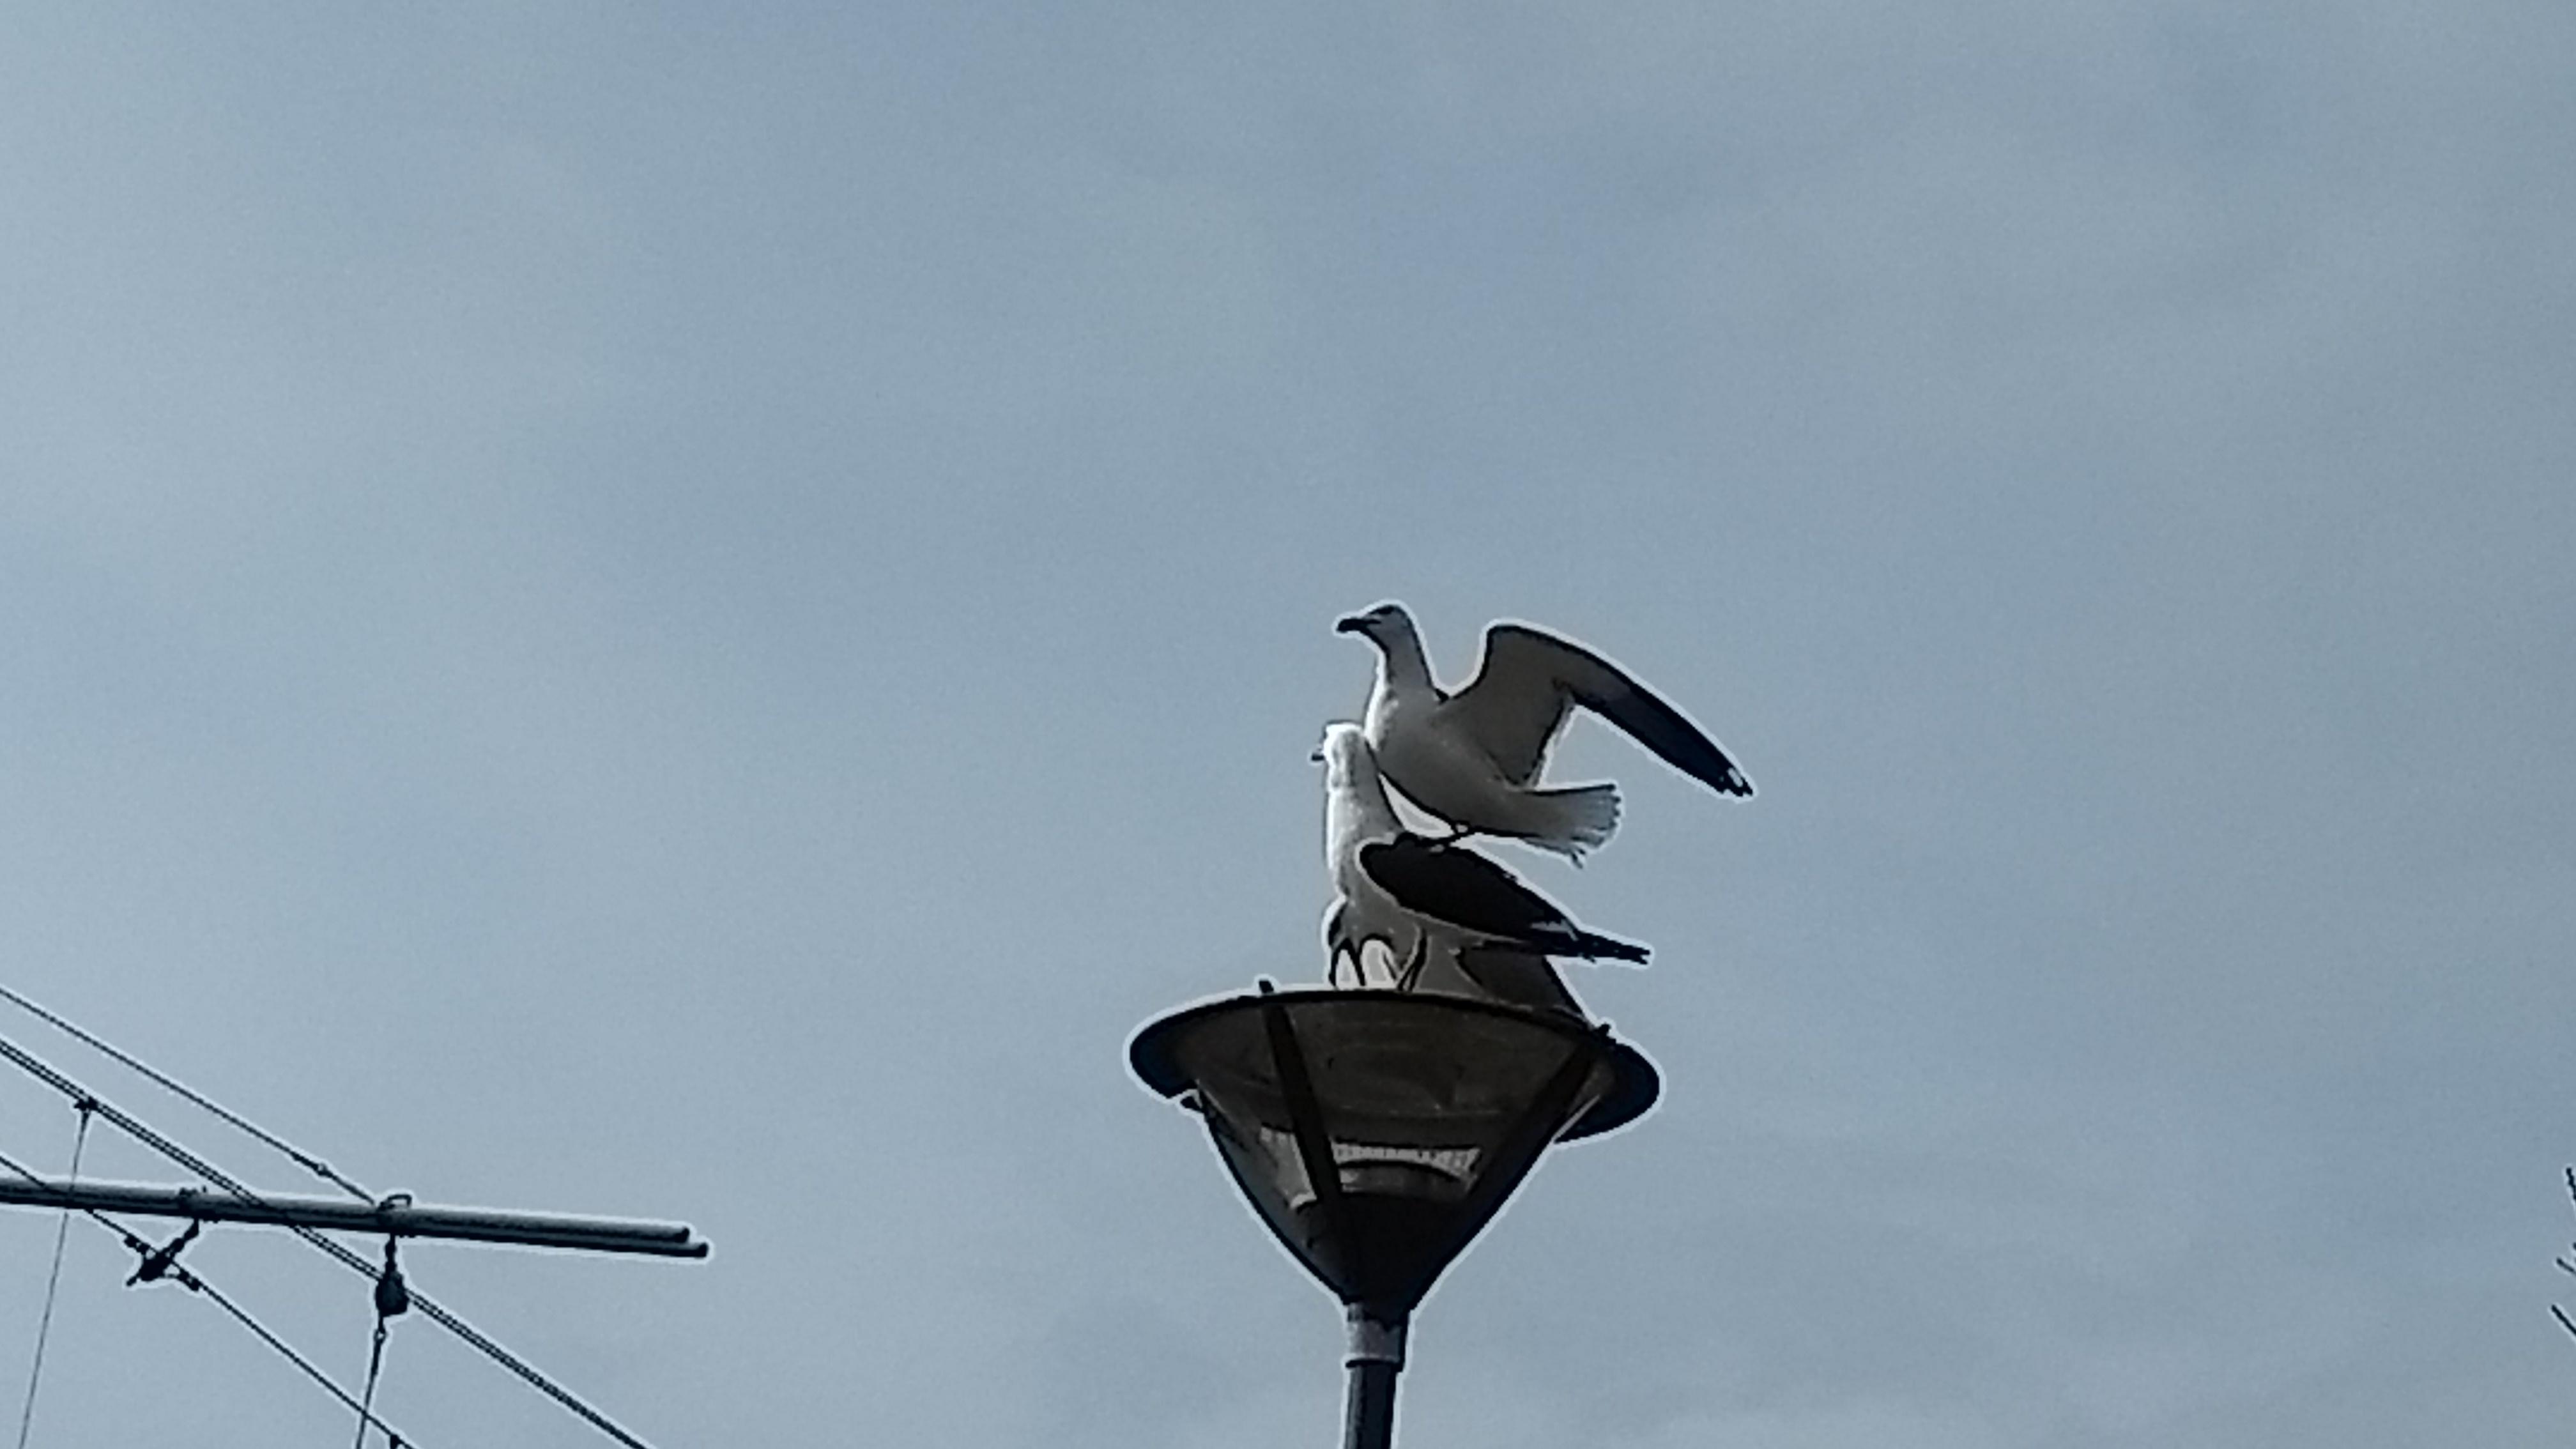 This seagull is standing on top of another seagull : mildlyinteresting